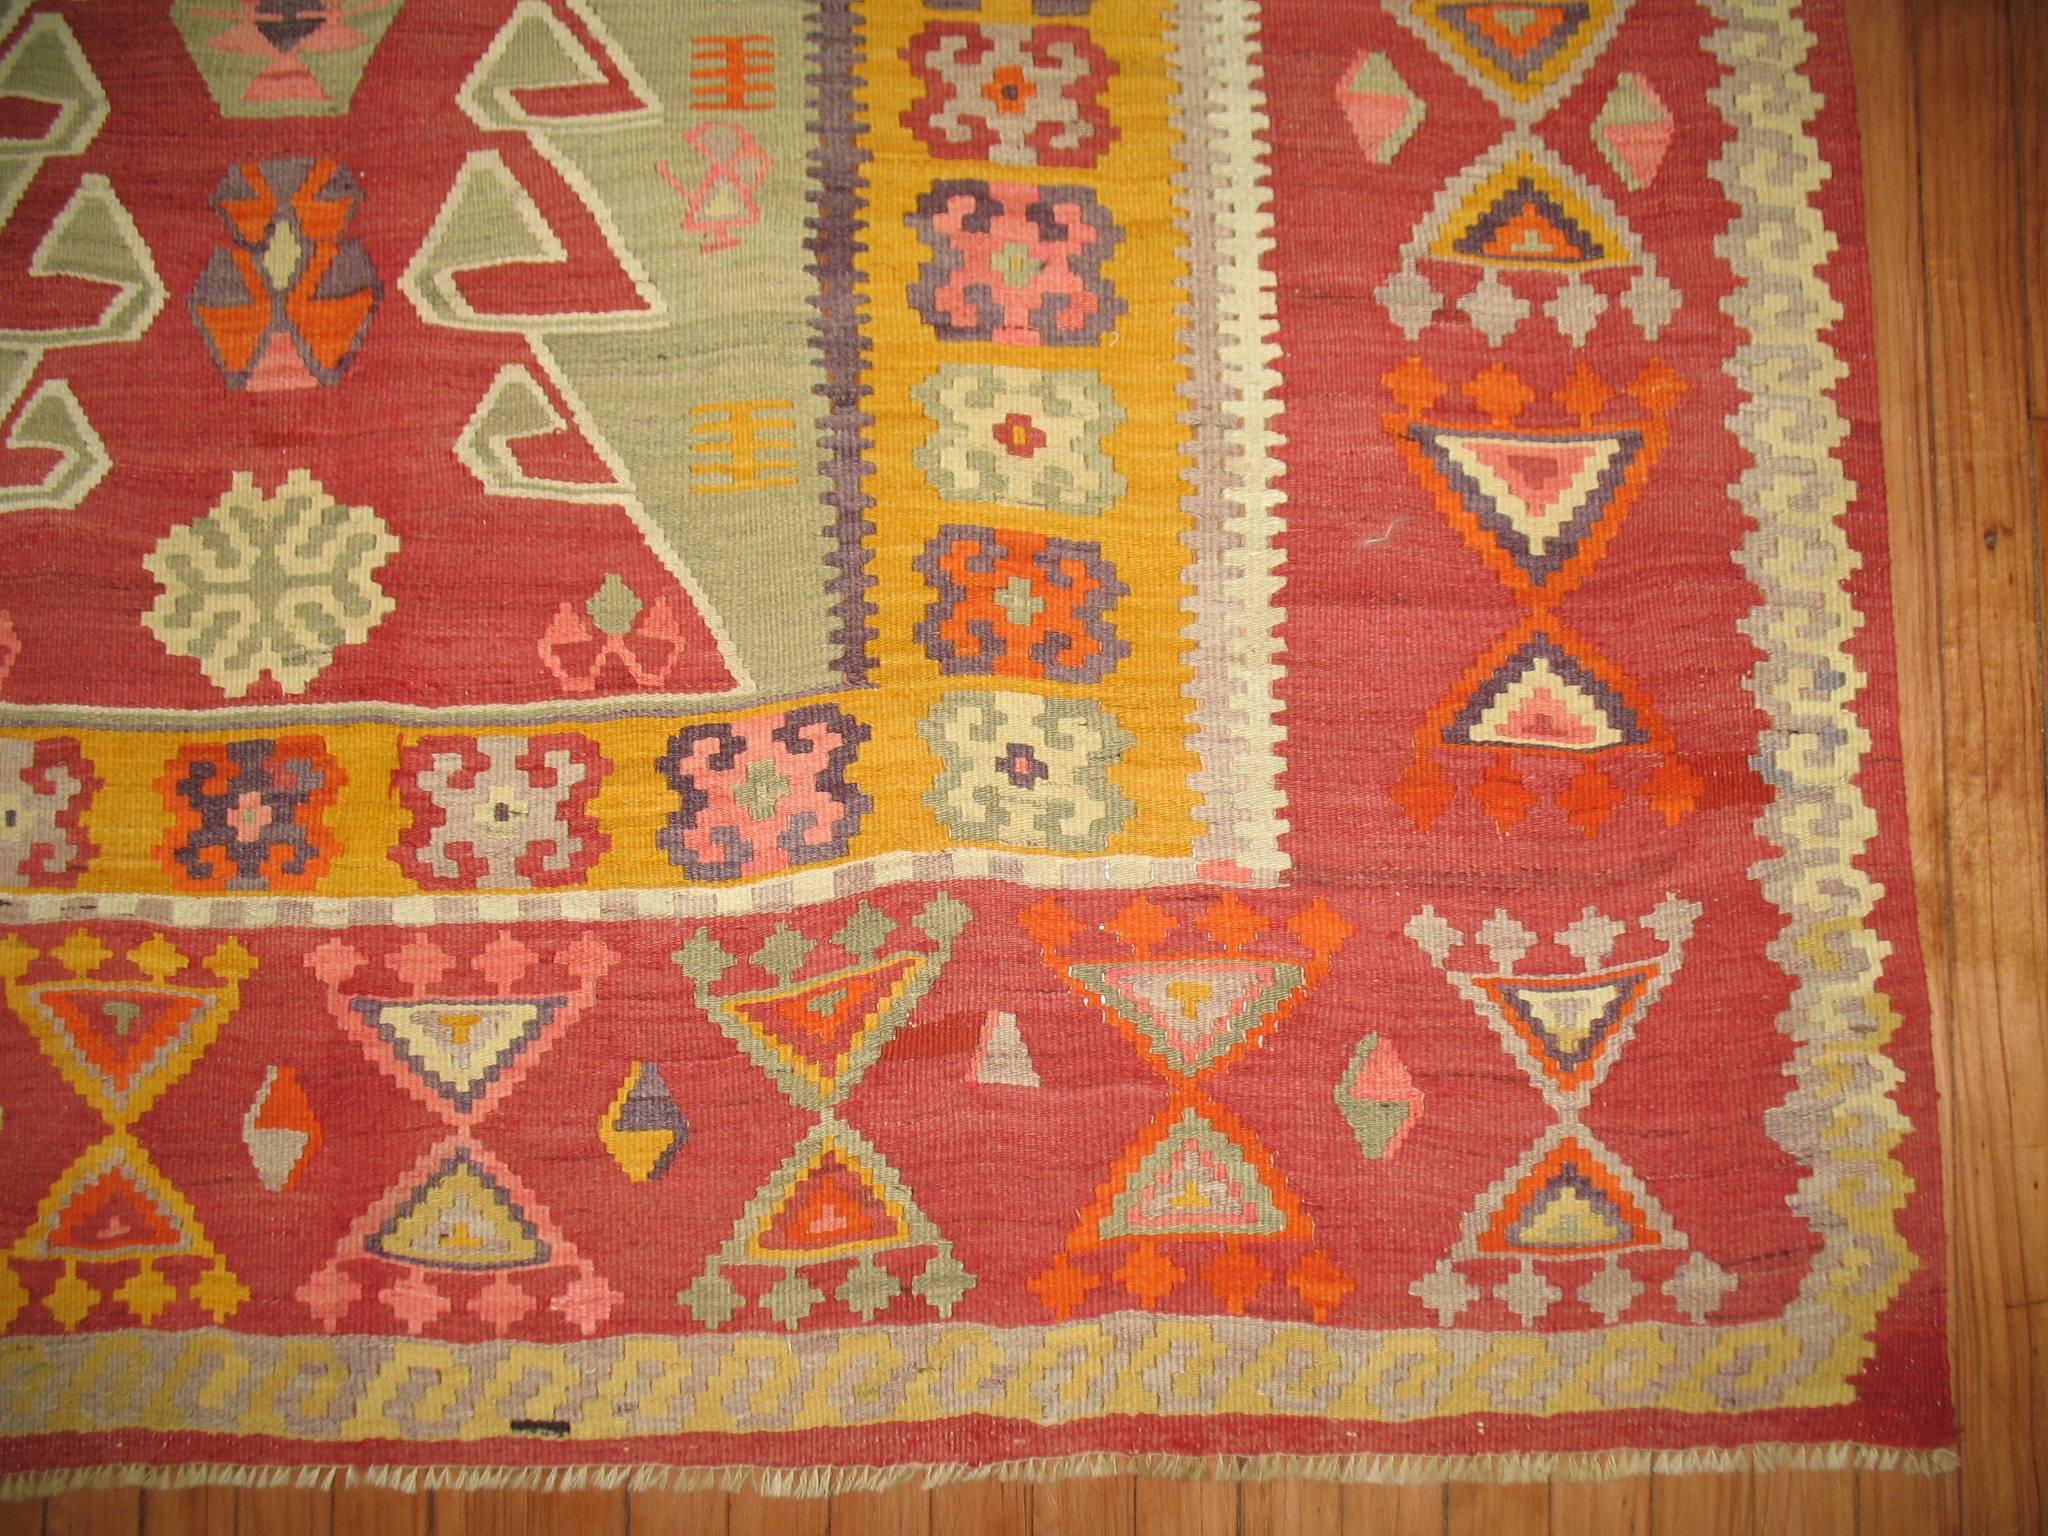 Colorful Turkish Kilim flat-weave with a Directional motif and sensational border.